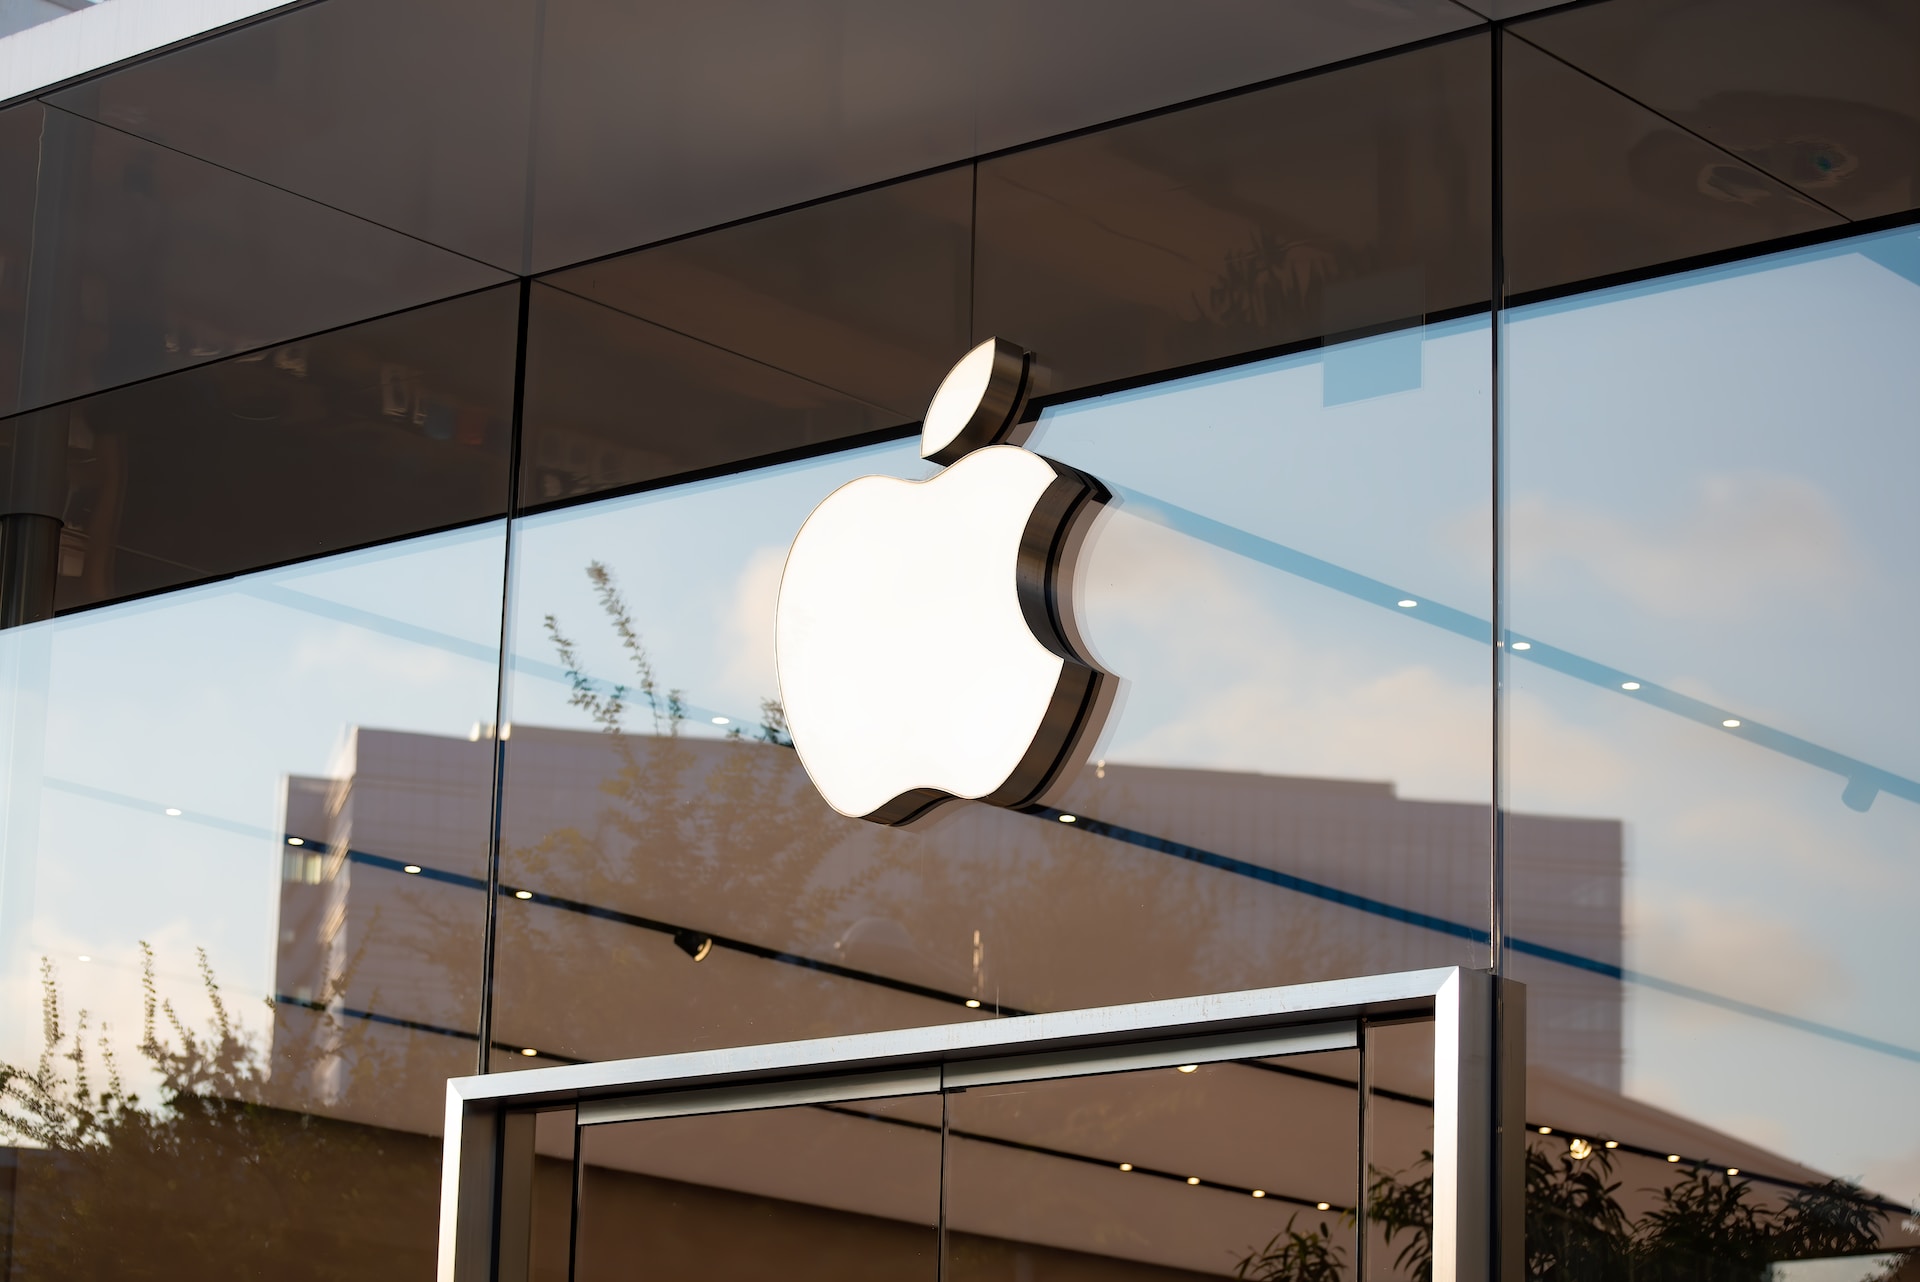 Photograph of the Apple store feature a white Apple logo against a glass window reflecting a cityscape